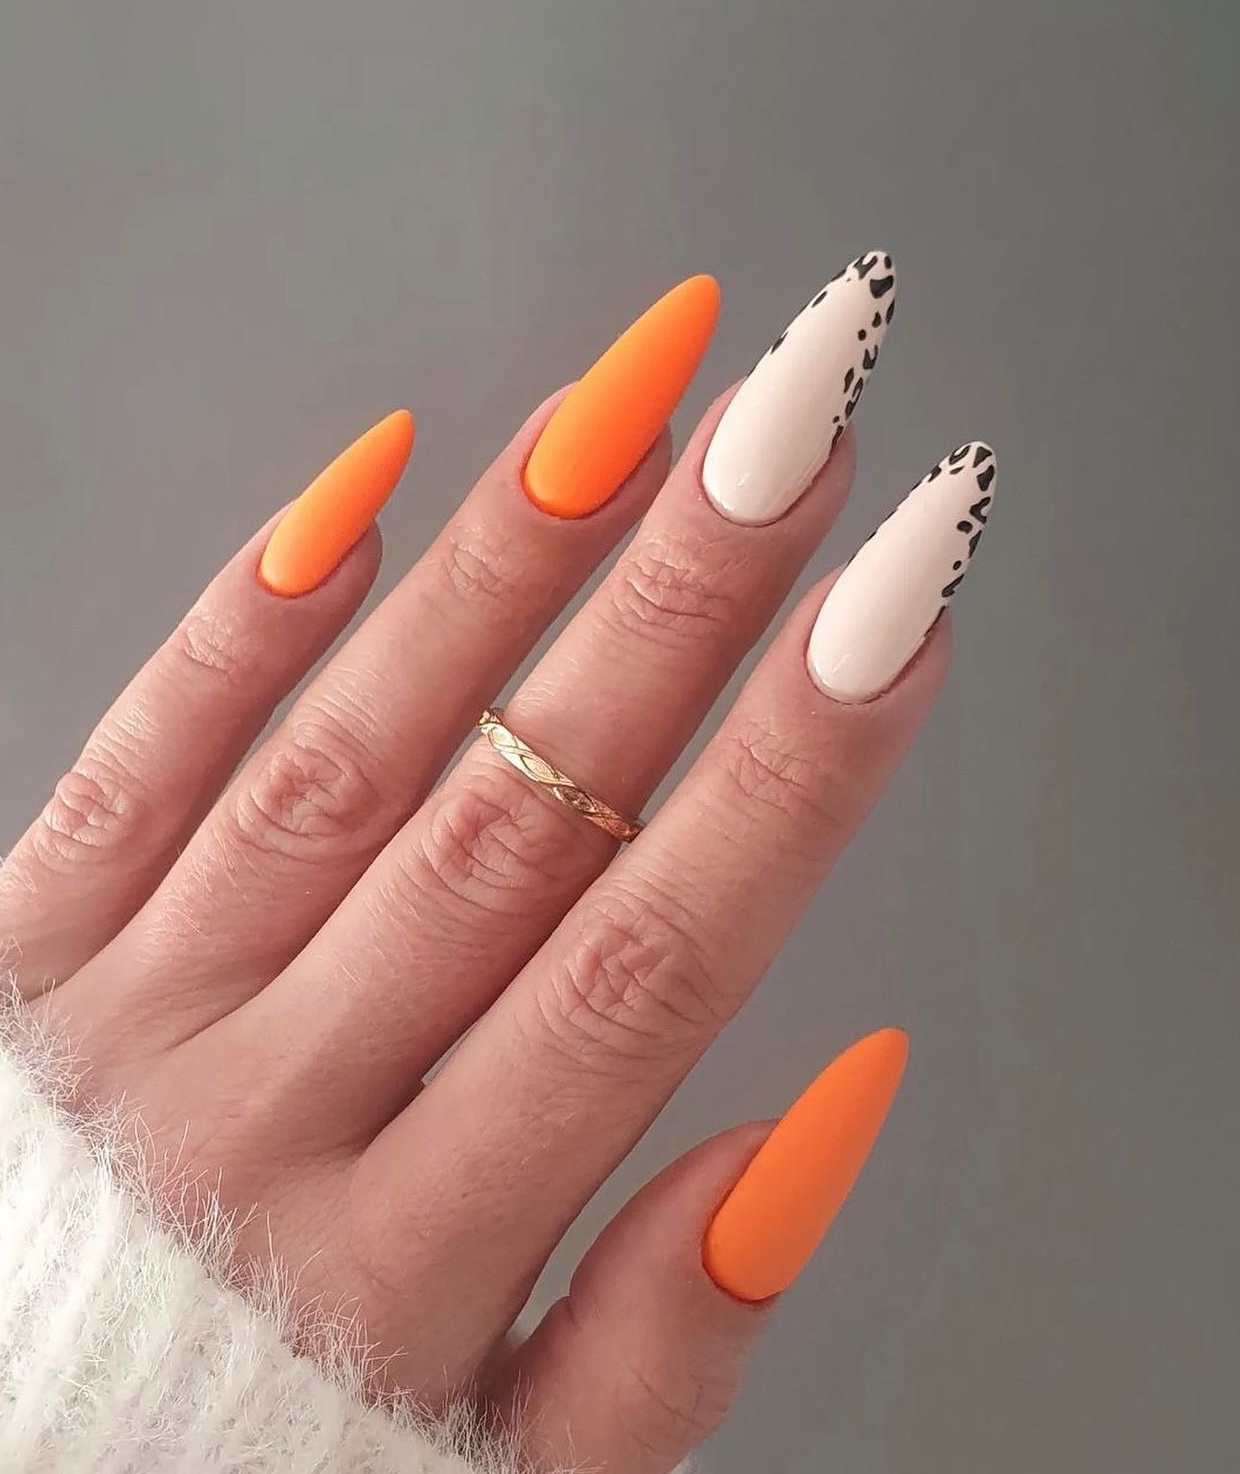 Orange and White Nails with Leopard Print on Tips